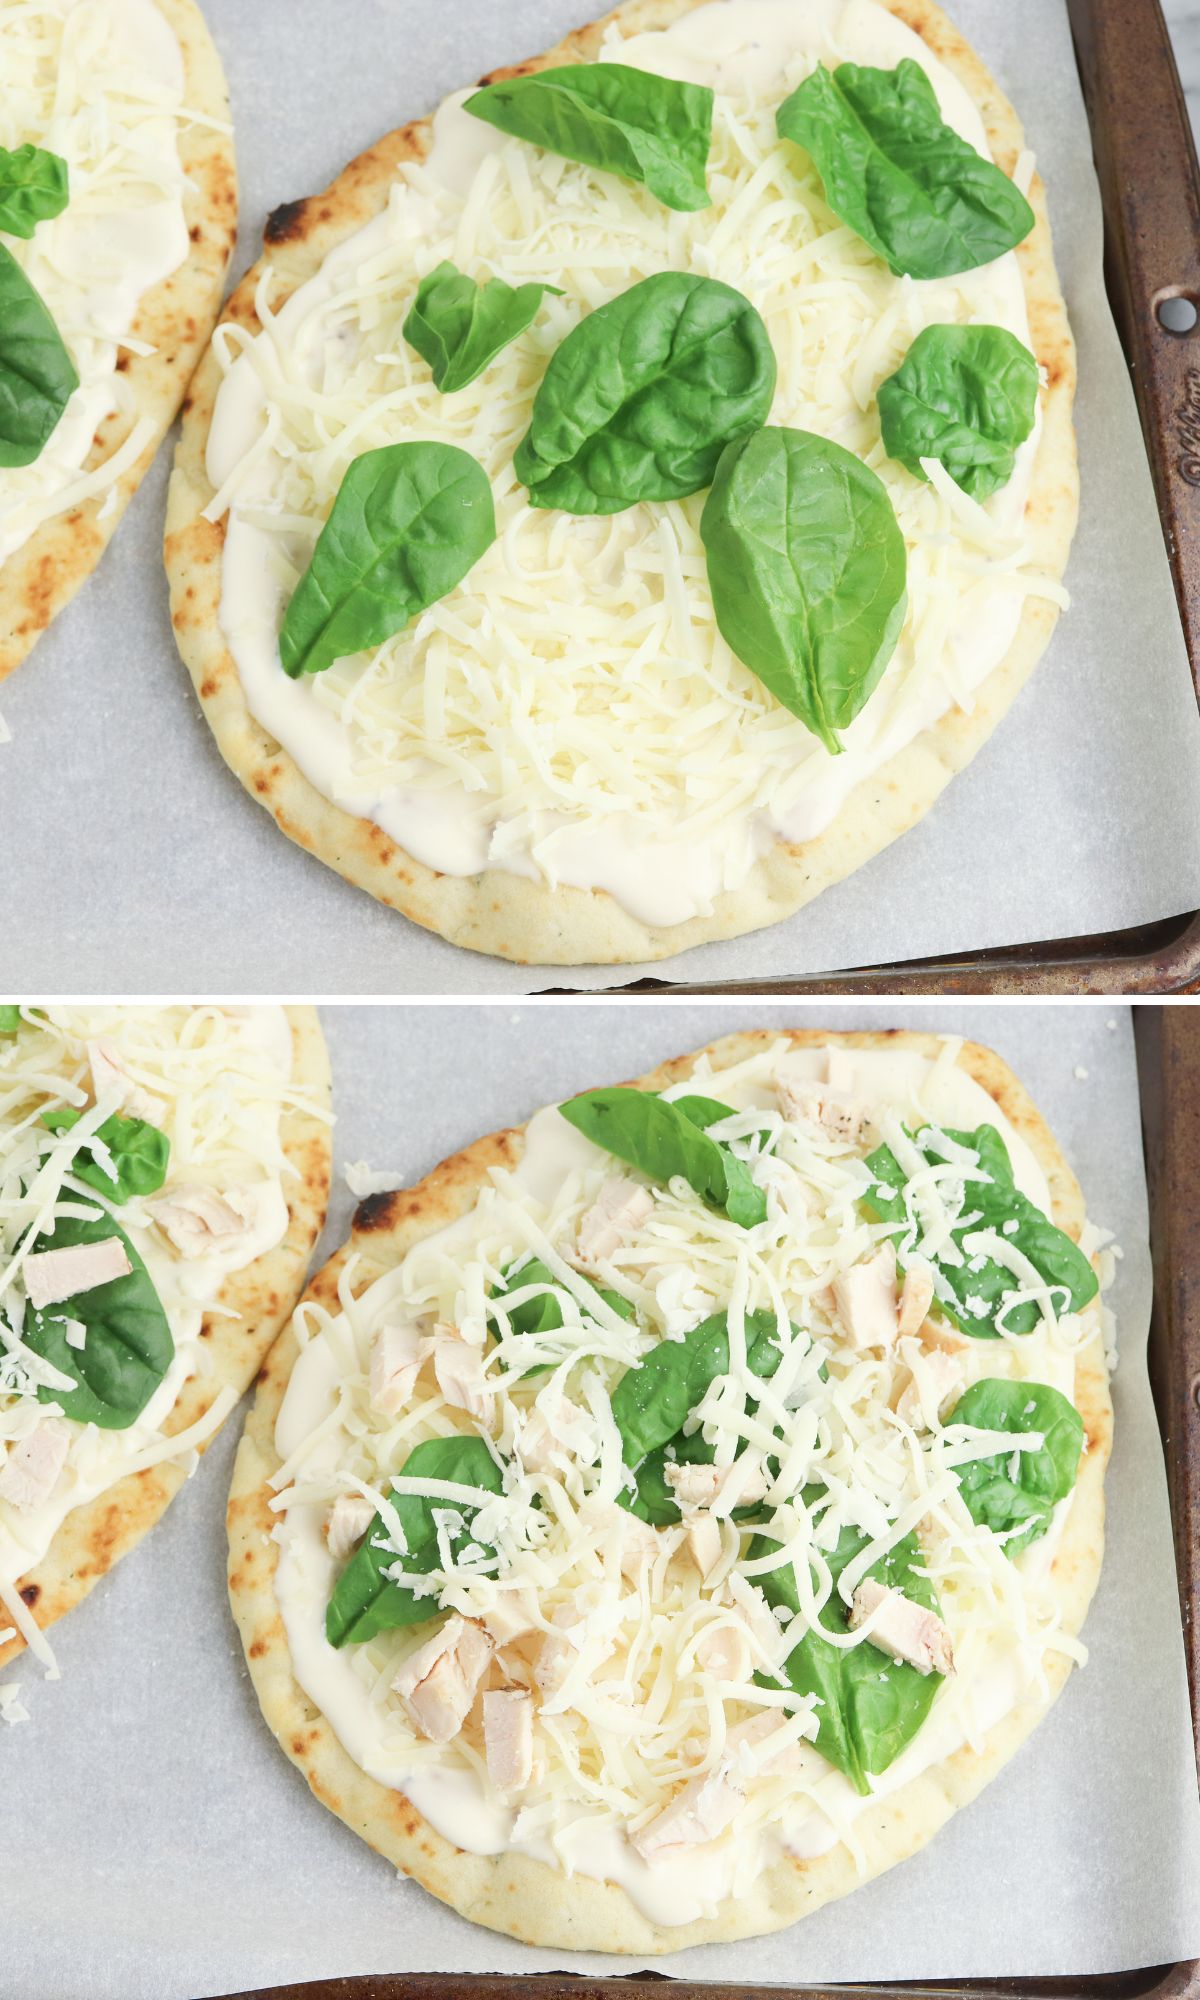 A pizza with cheese and spinach.